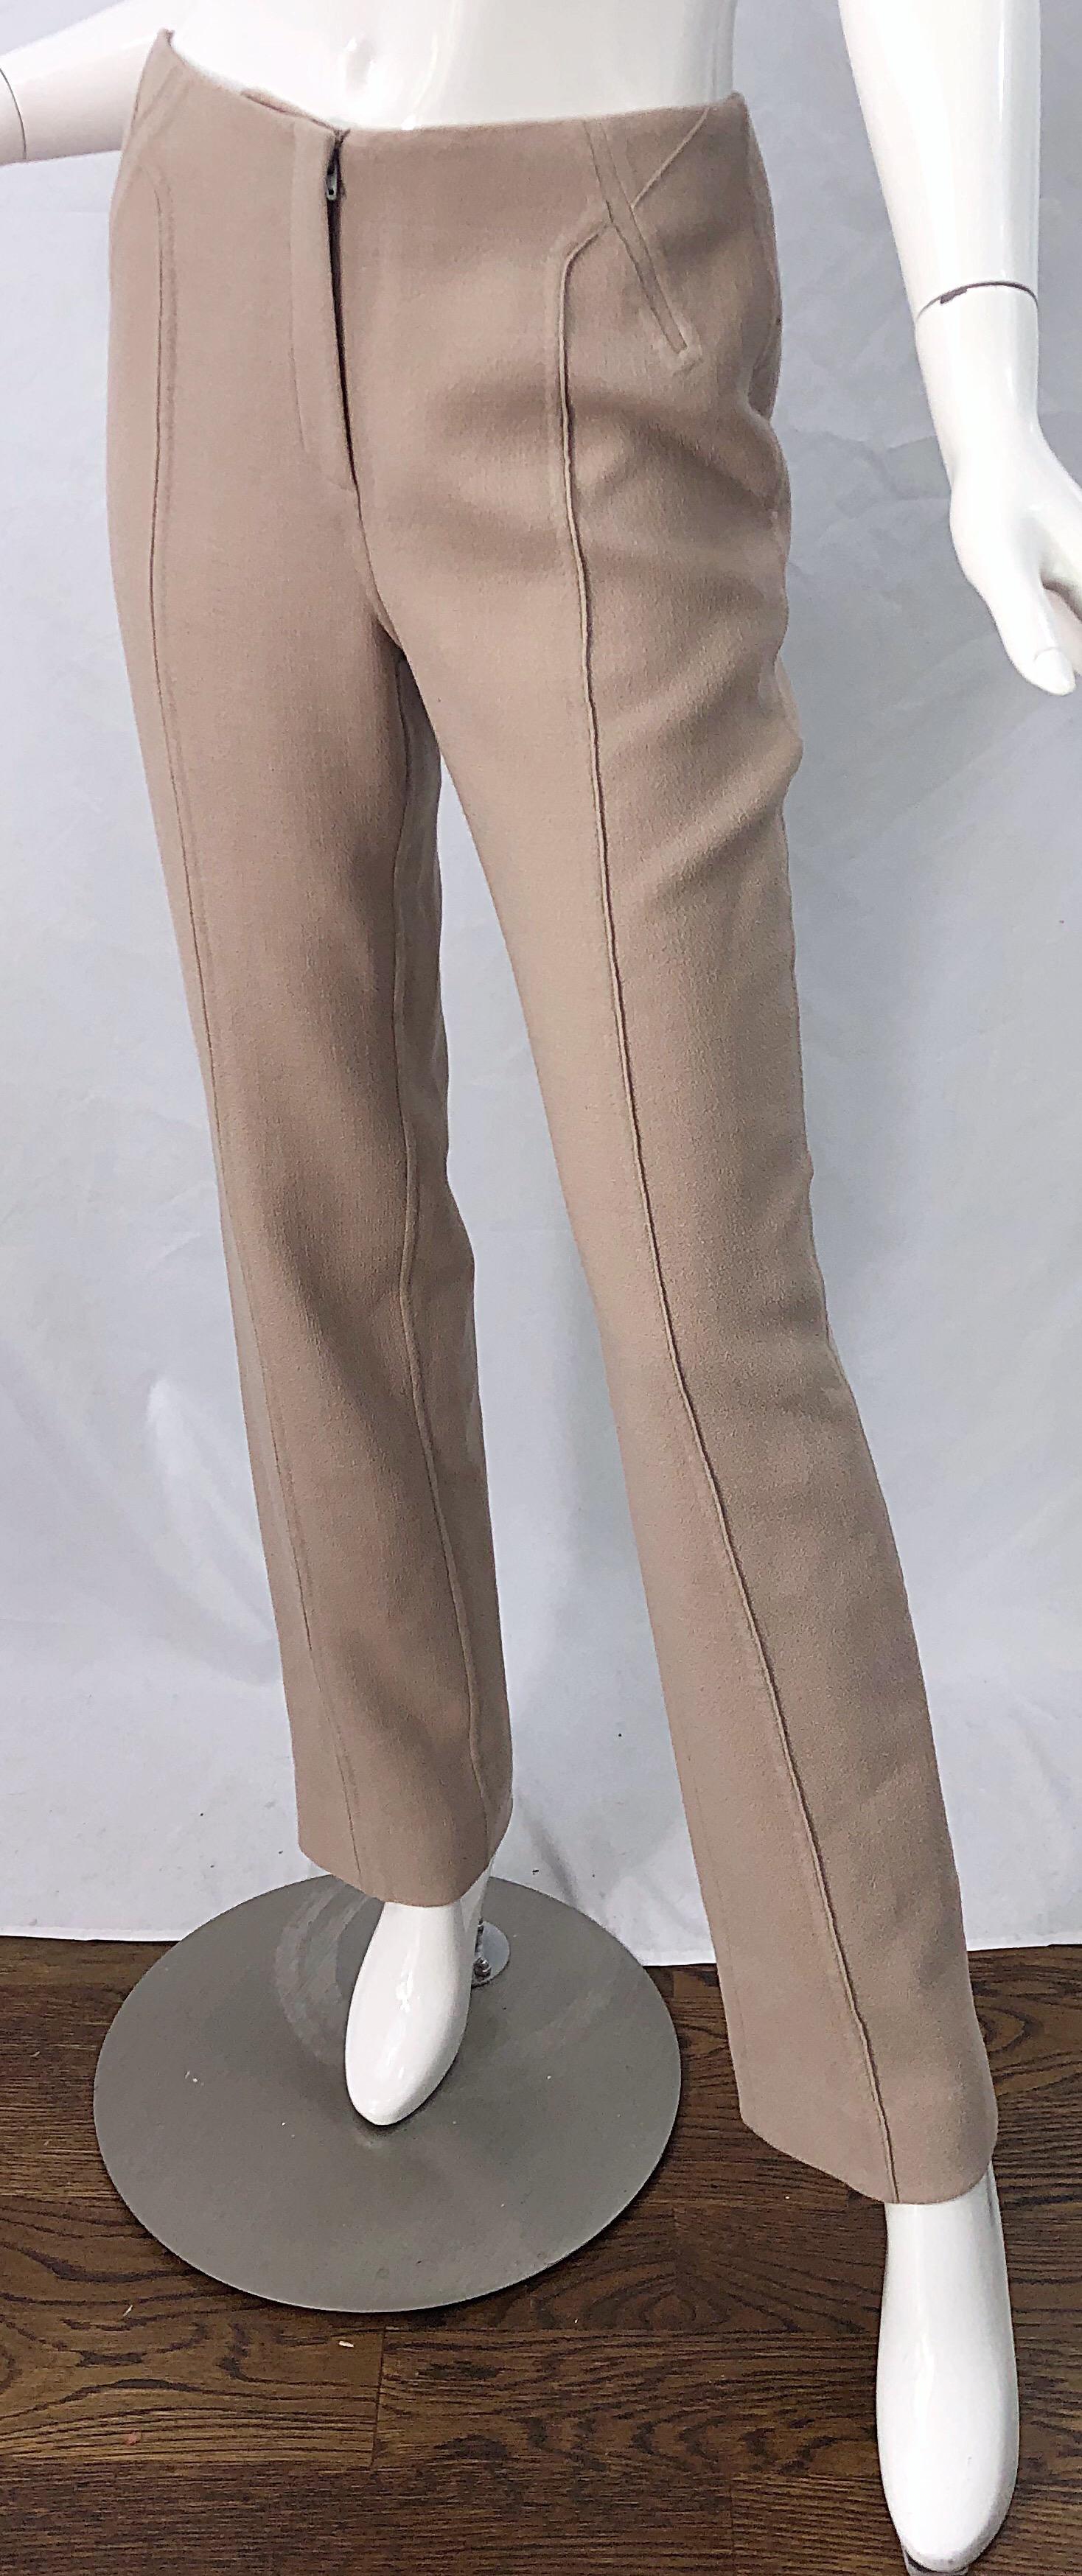 Chado Ralph Rucci 1990s Tan Khaki High Rise Slim Tailored Fit Trosuers 90s Pants In Excellent Condition For Sale In San Diego, CA